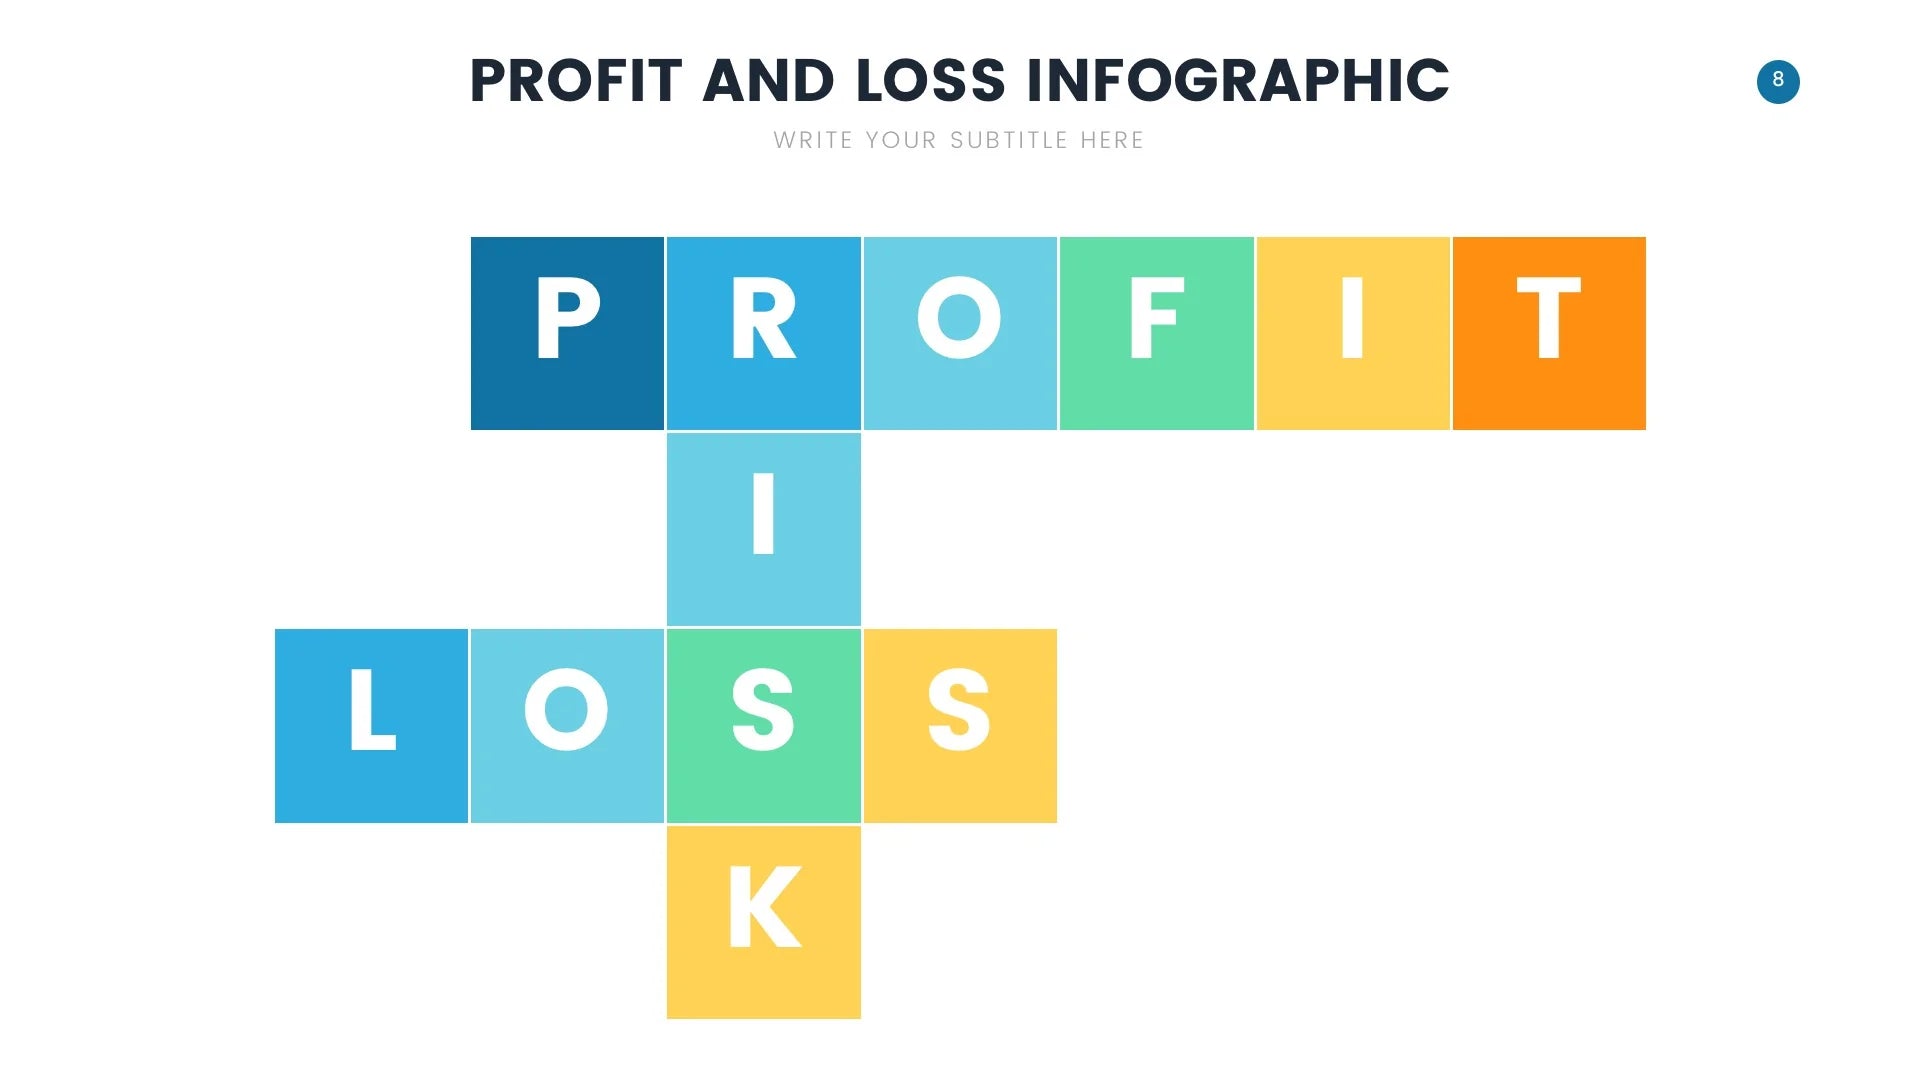 Profit and Loss Infographic templates